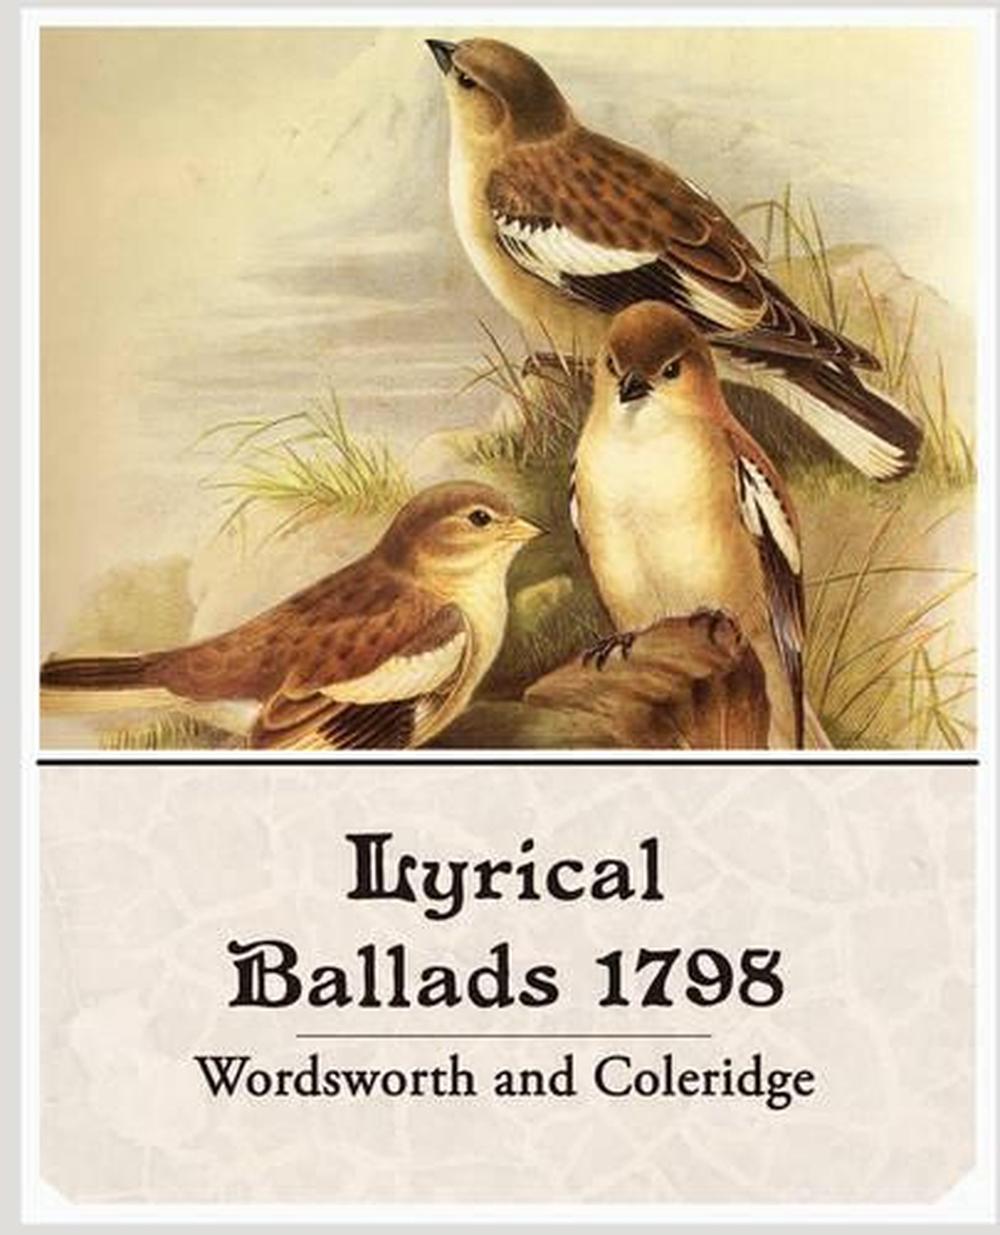 preface of the lyrical ballads